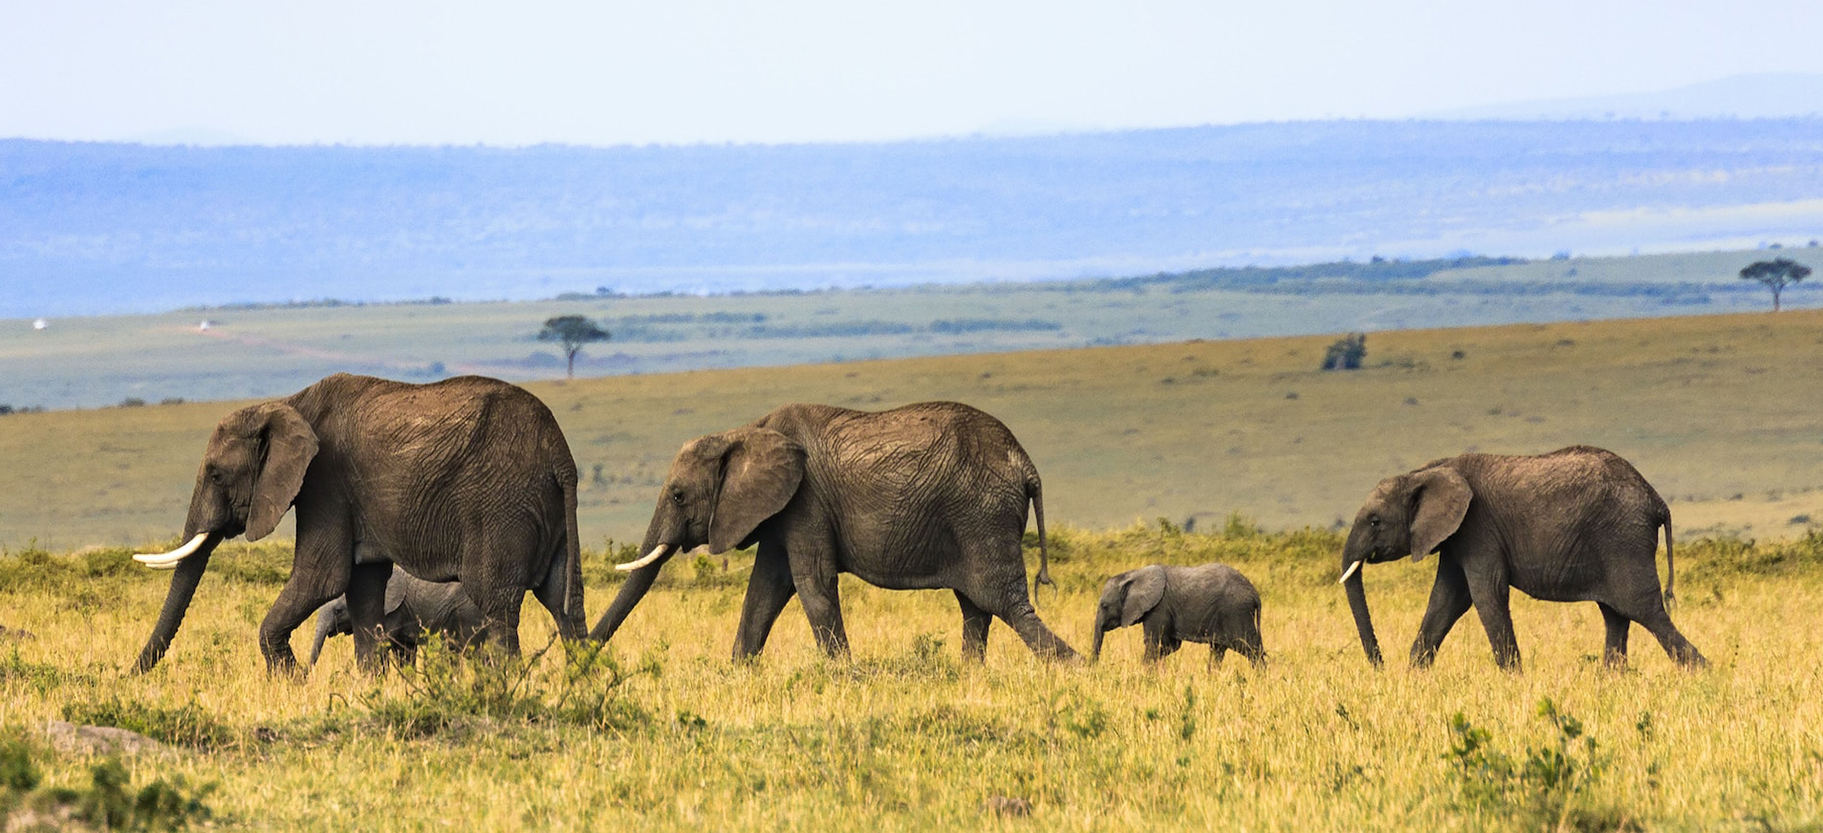 Explore and fall in love with KENYA